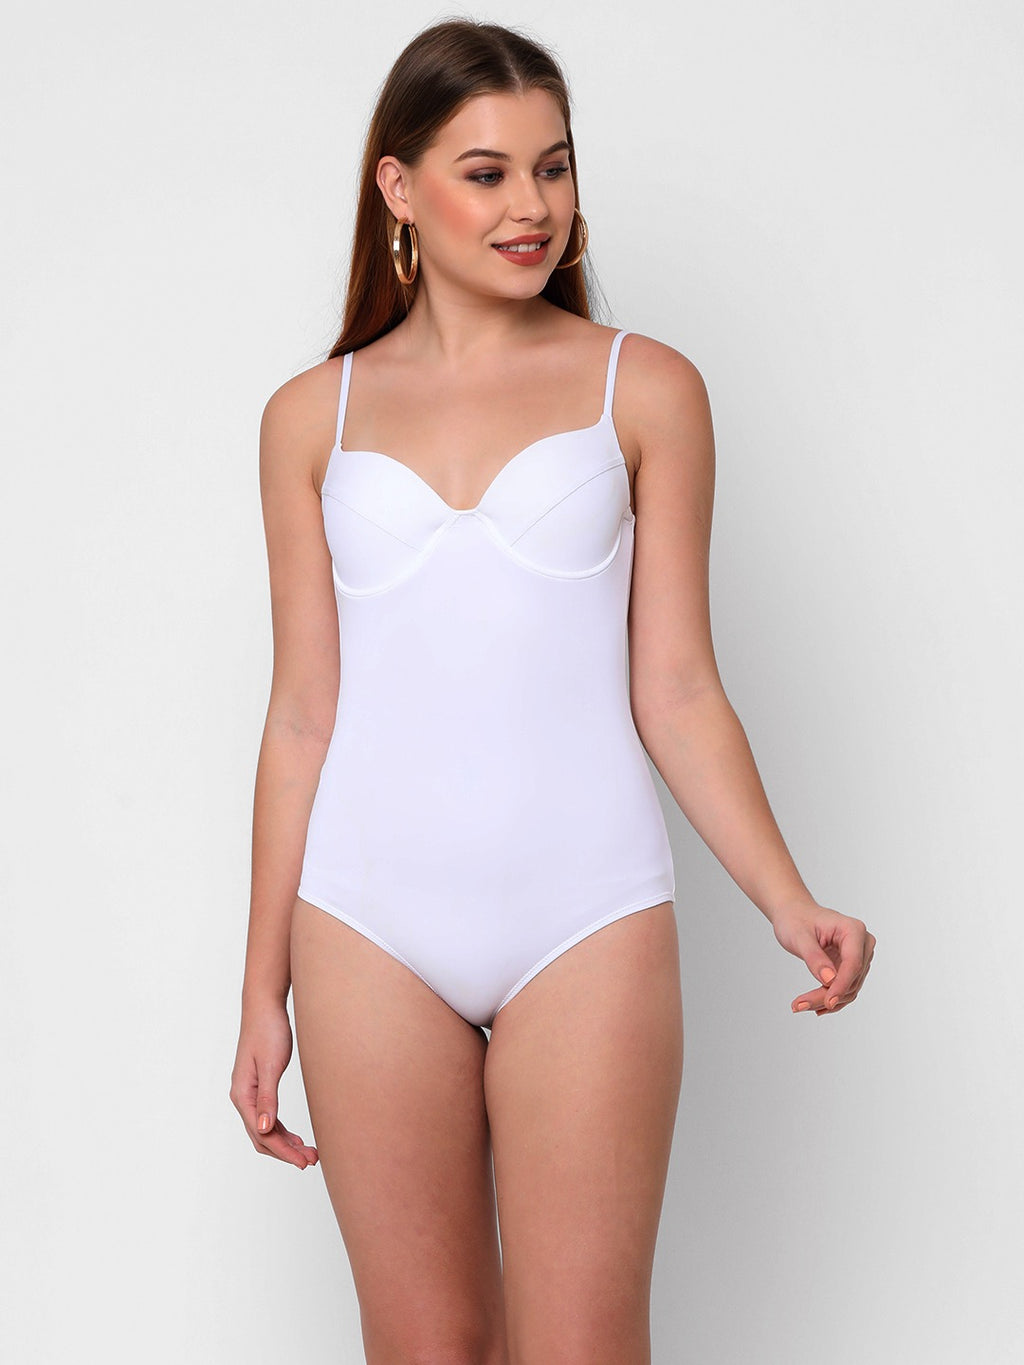 Shop one piece swimwear online - in mumbai the beach company - white swimsuits - Goddess swimsuits - underwire swimsuits - sexy swimwear - Beach swimwear - padded swimsuits - full coverage swimsuits 